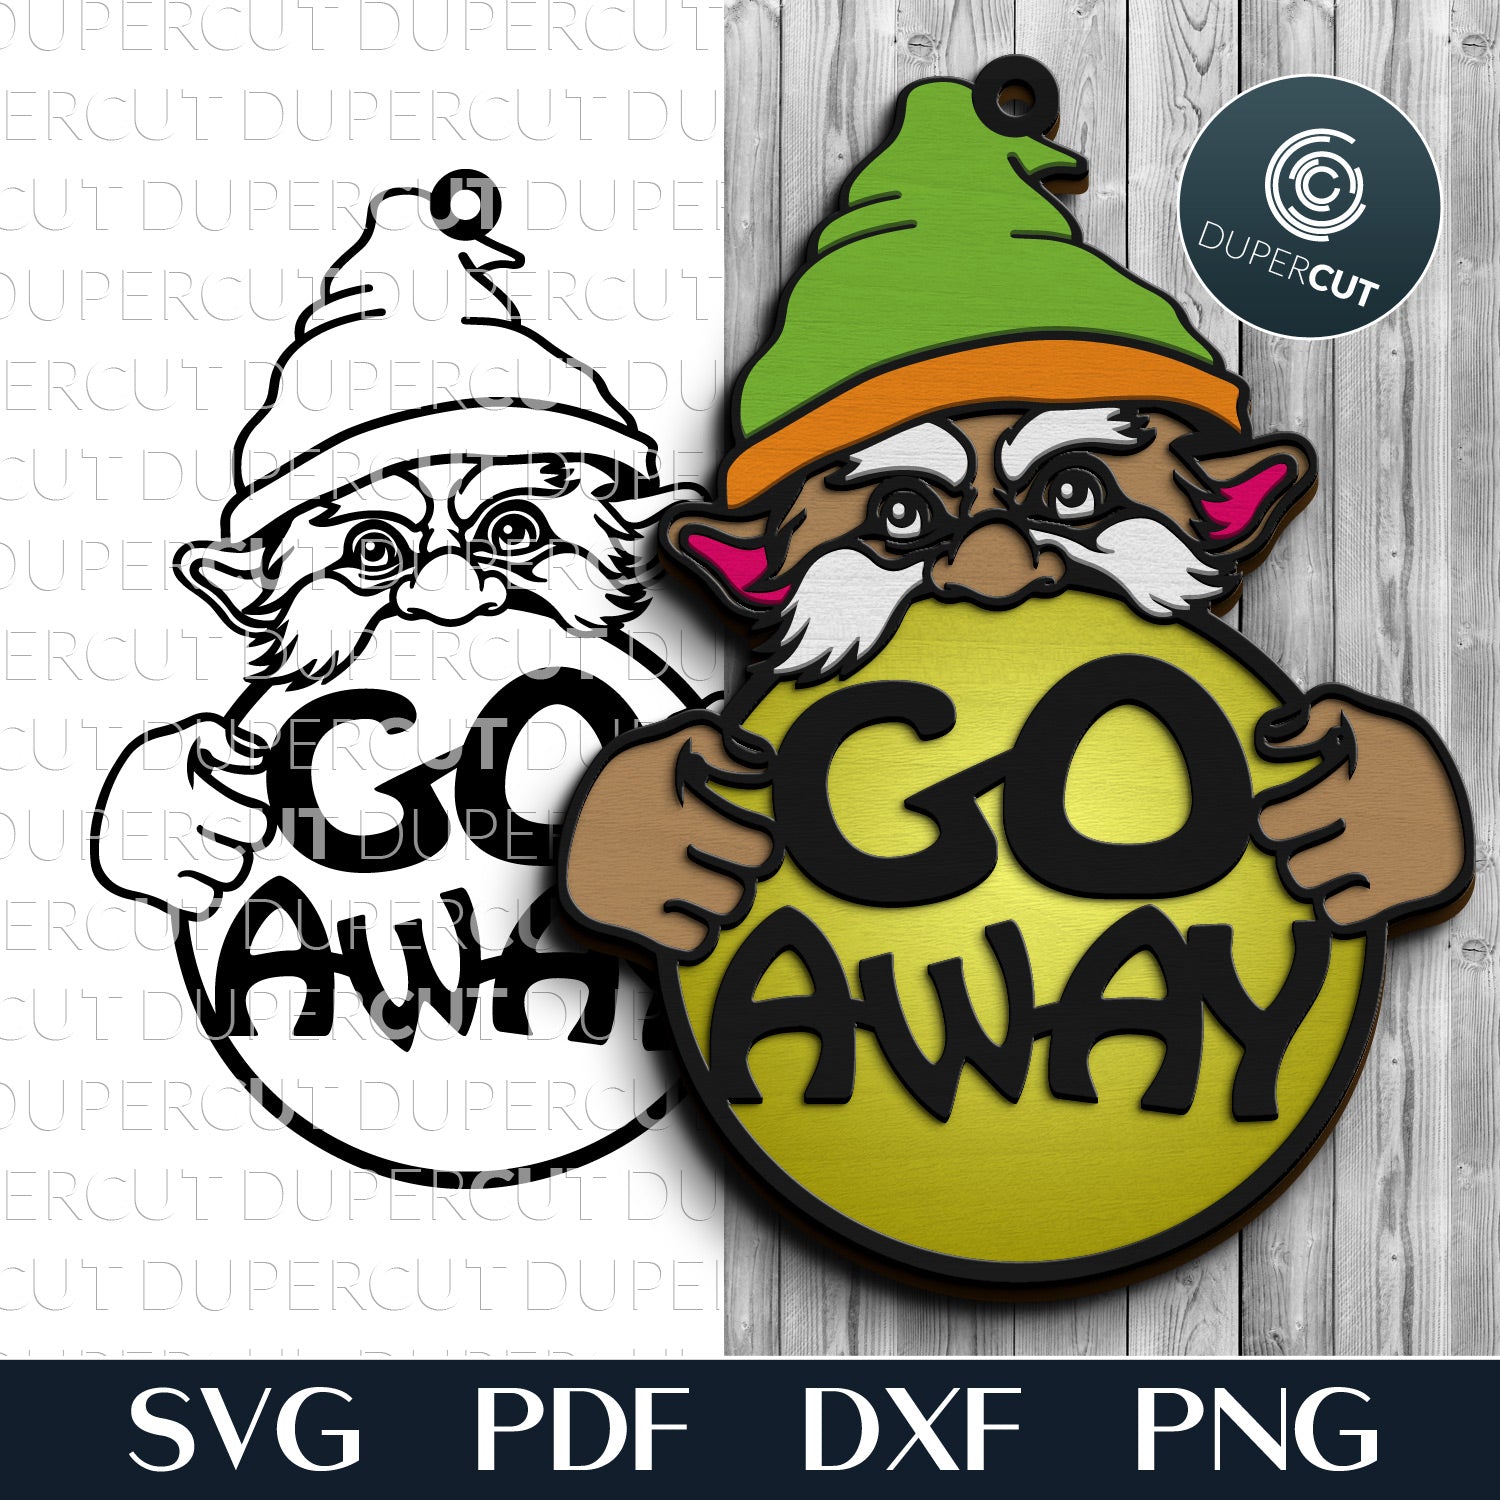 Garden Gnome Go Away sign door hanger - SVG DXF layered cutting files for Glowforge, Cricut, Silhouette, CNC plasma machines, scroll saw pattern by www.DuperCut.com